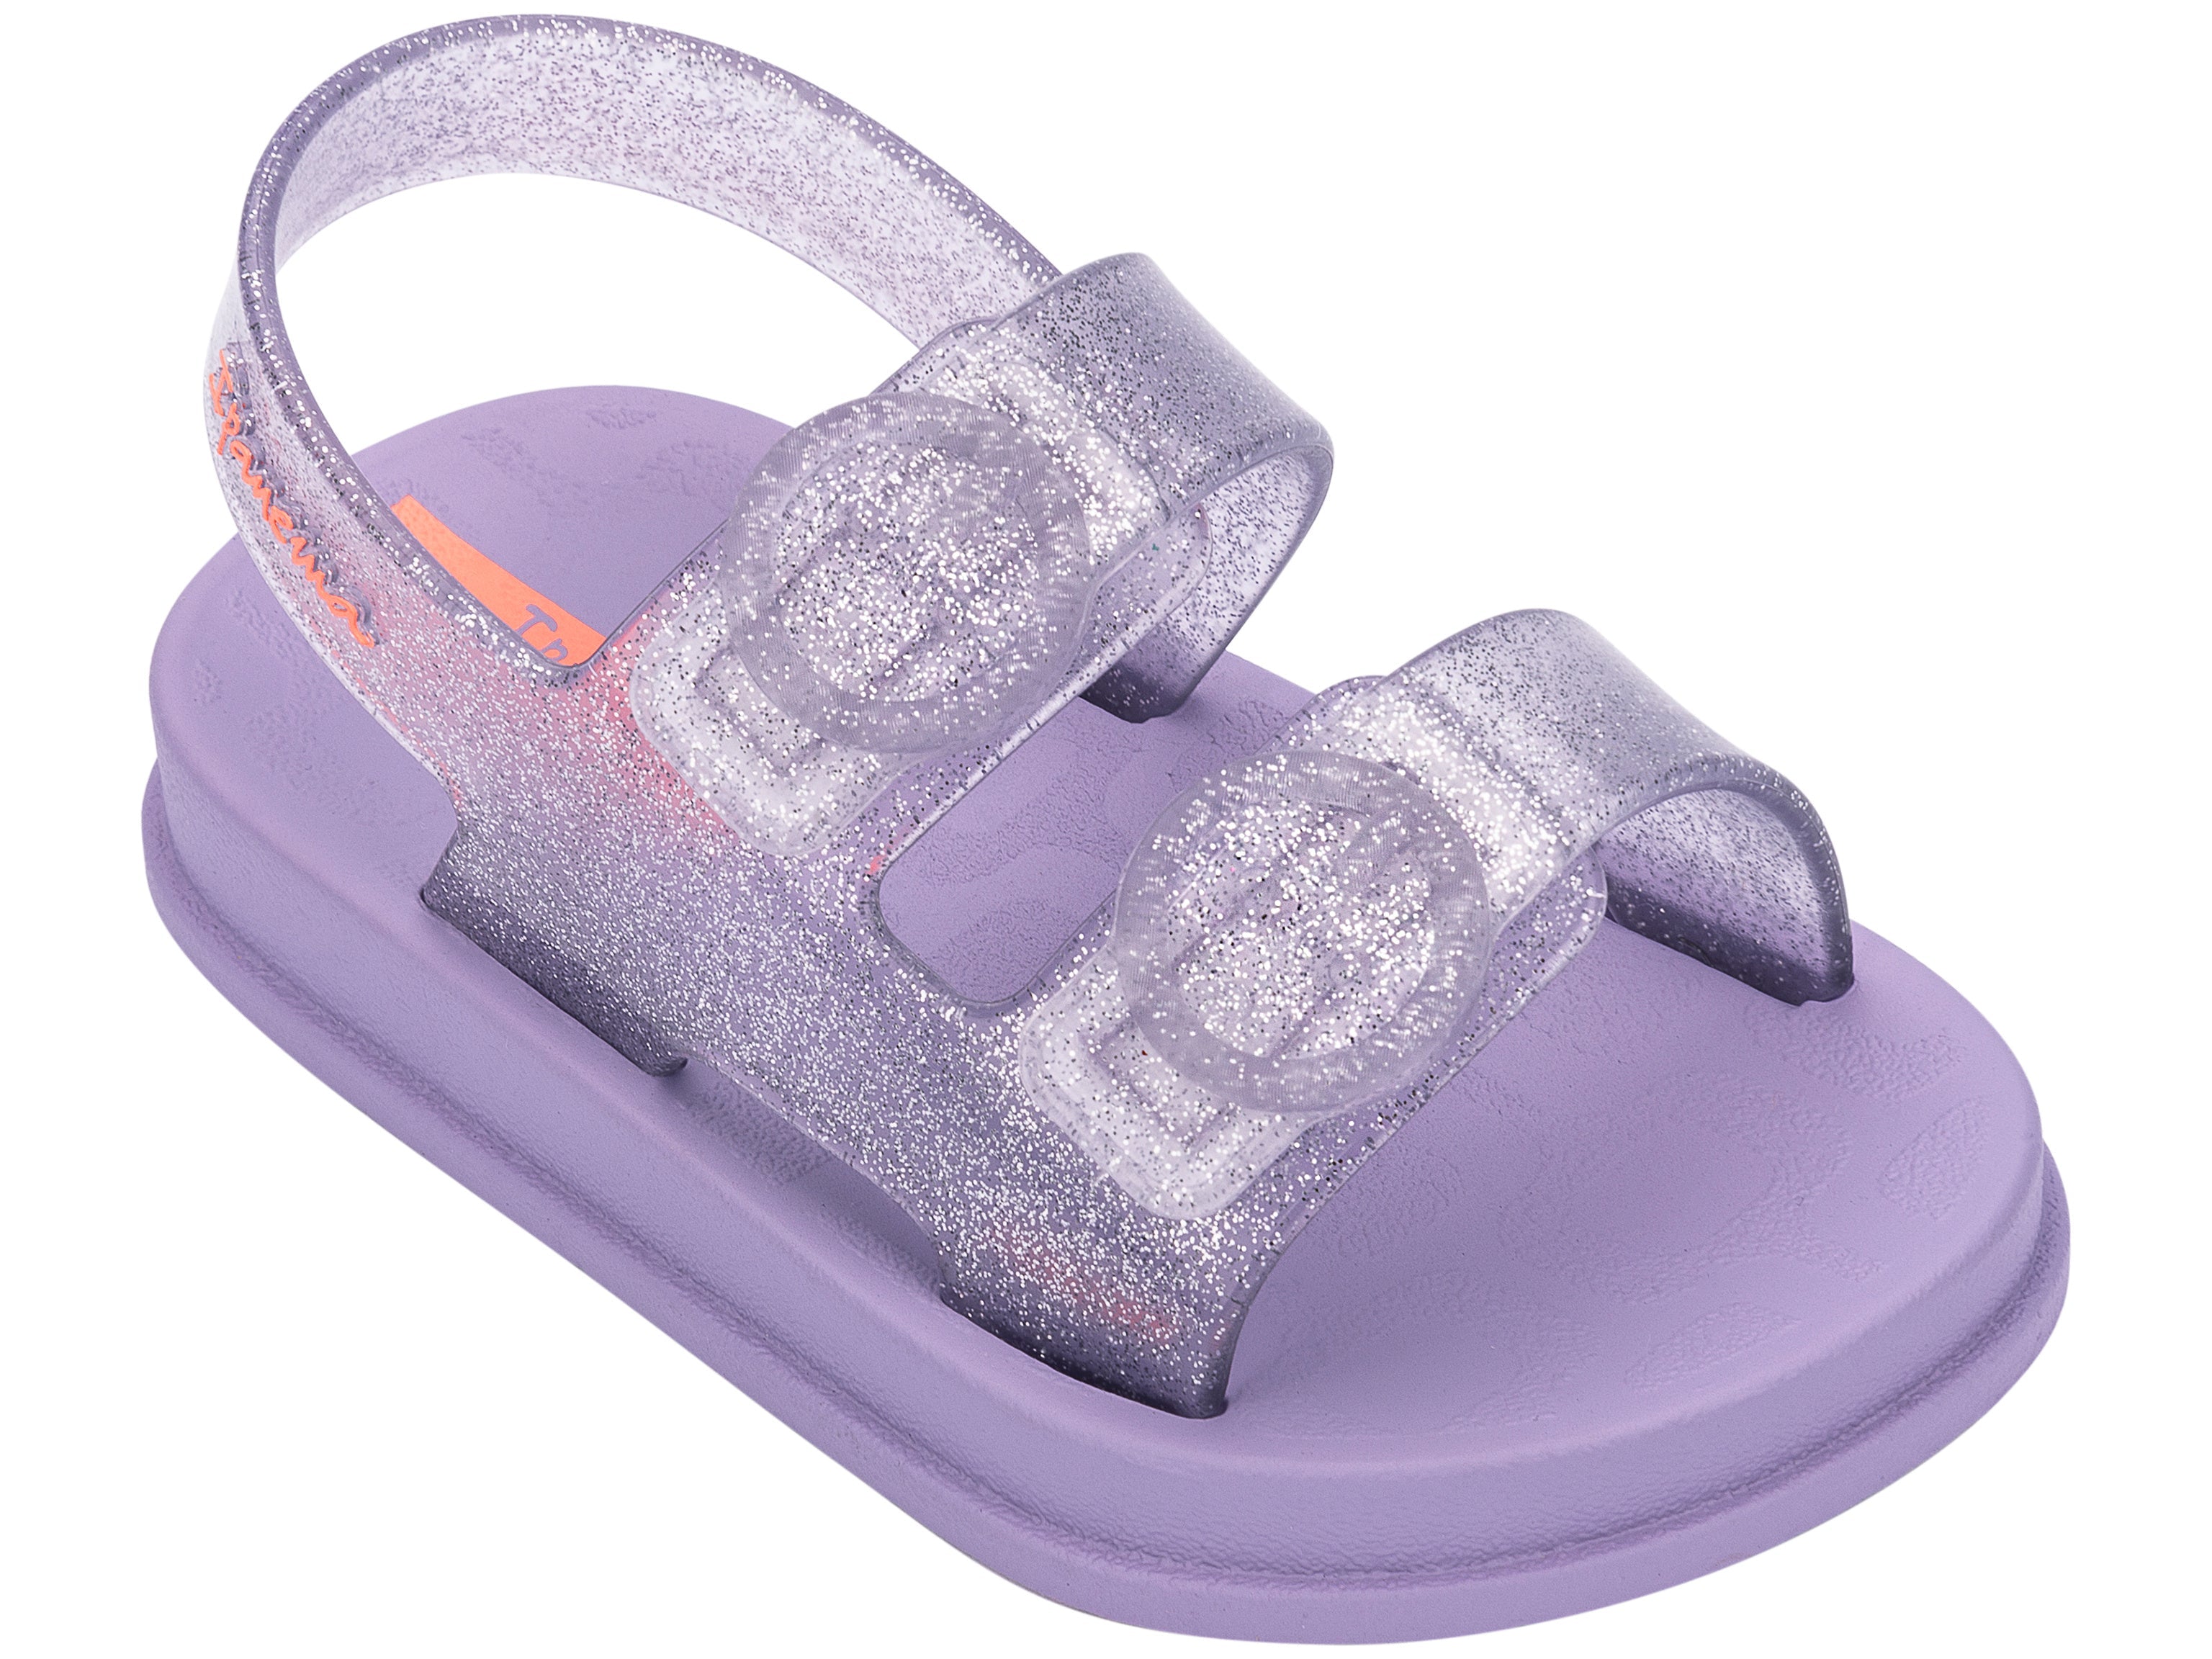 Angled view of a purple Ipanema Follow baby sandal with two decorative buckles on the upper.